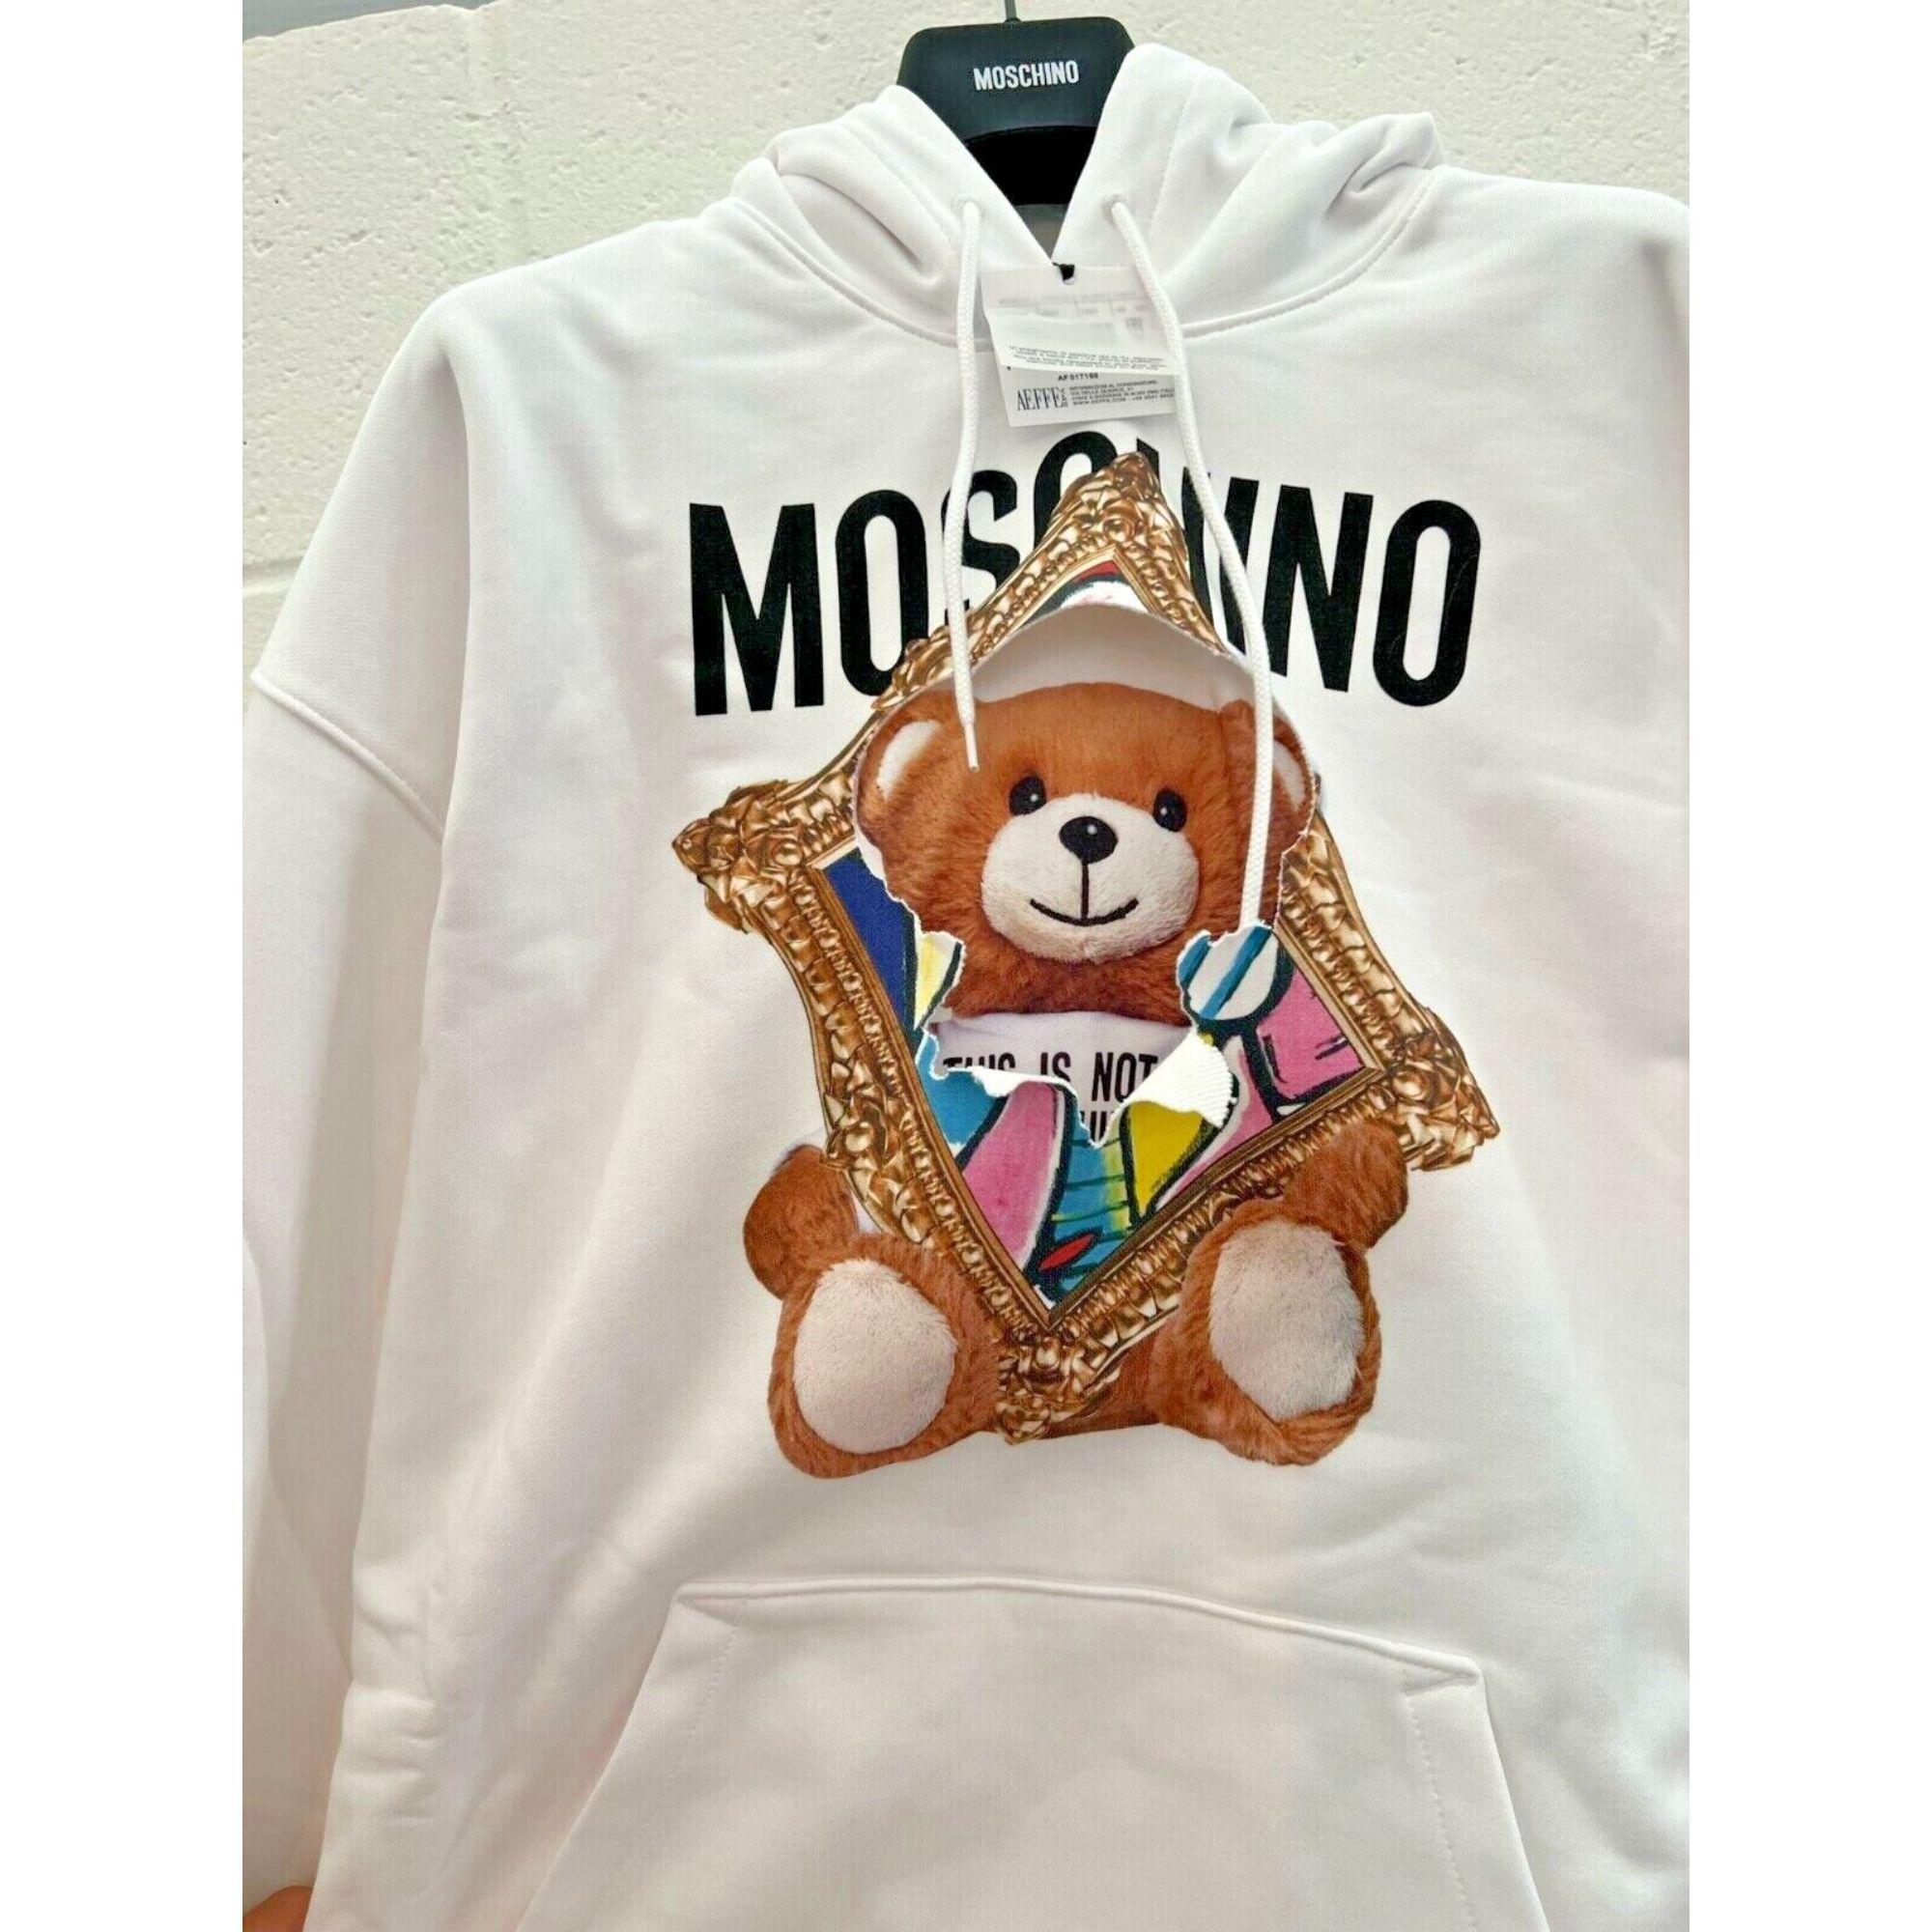 SS20 Moschino Couture Jeremy Scott Teddybear Bursting Thru Painting White Hoodie

Additional Information:
Material: 100% Cotton
Color: White
Size: IT 44 / US 10
Style: Pullover
Pattern: Logo, Teddy Bear, Painting
Dimensions: Shoulder to shoulder